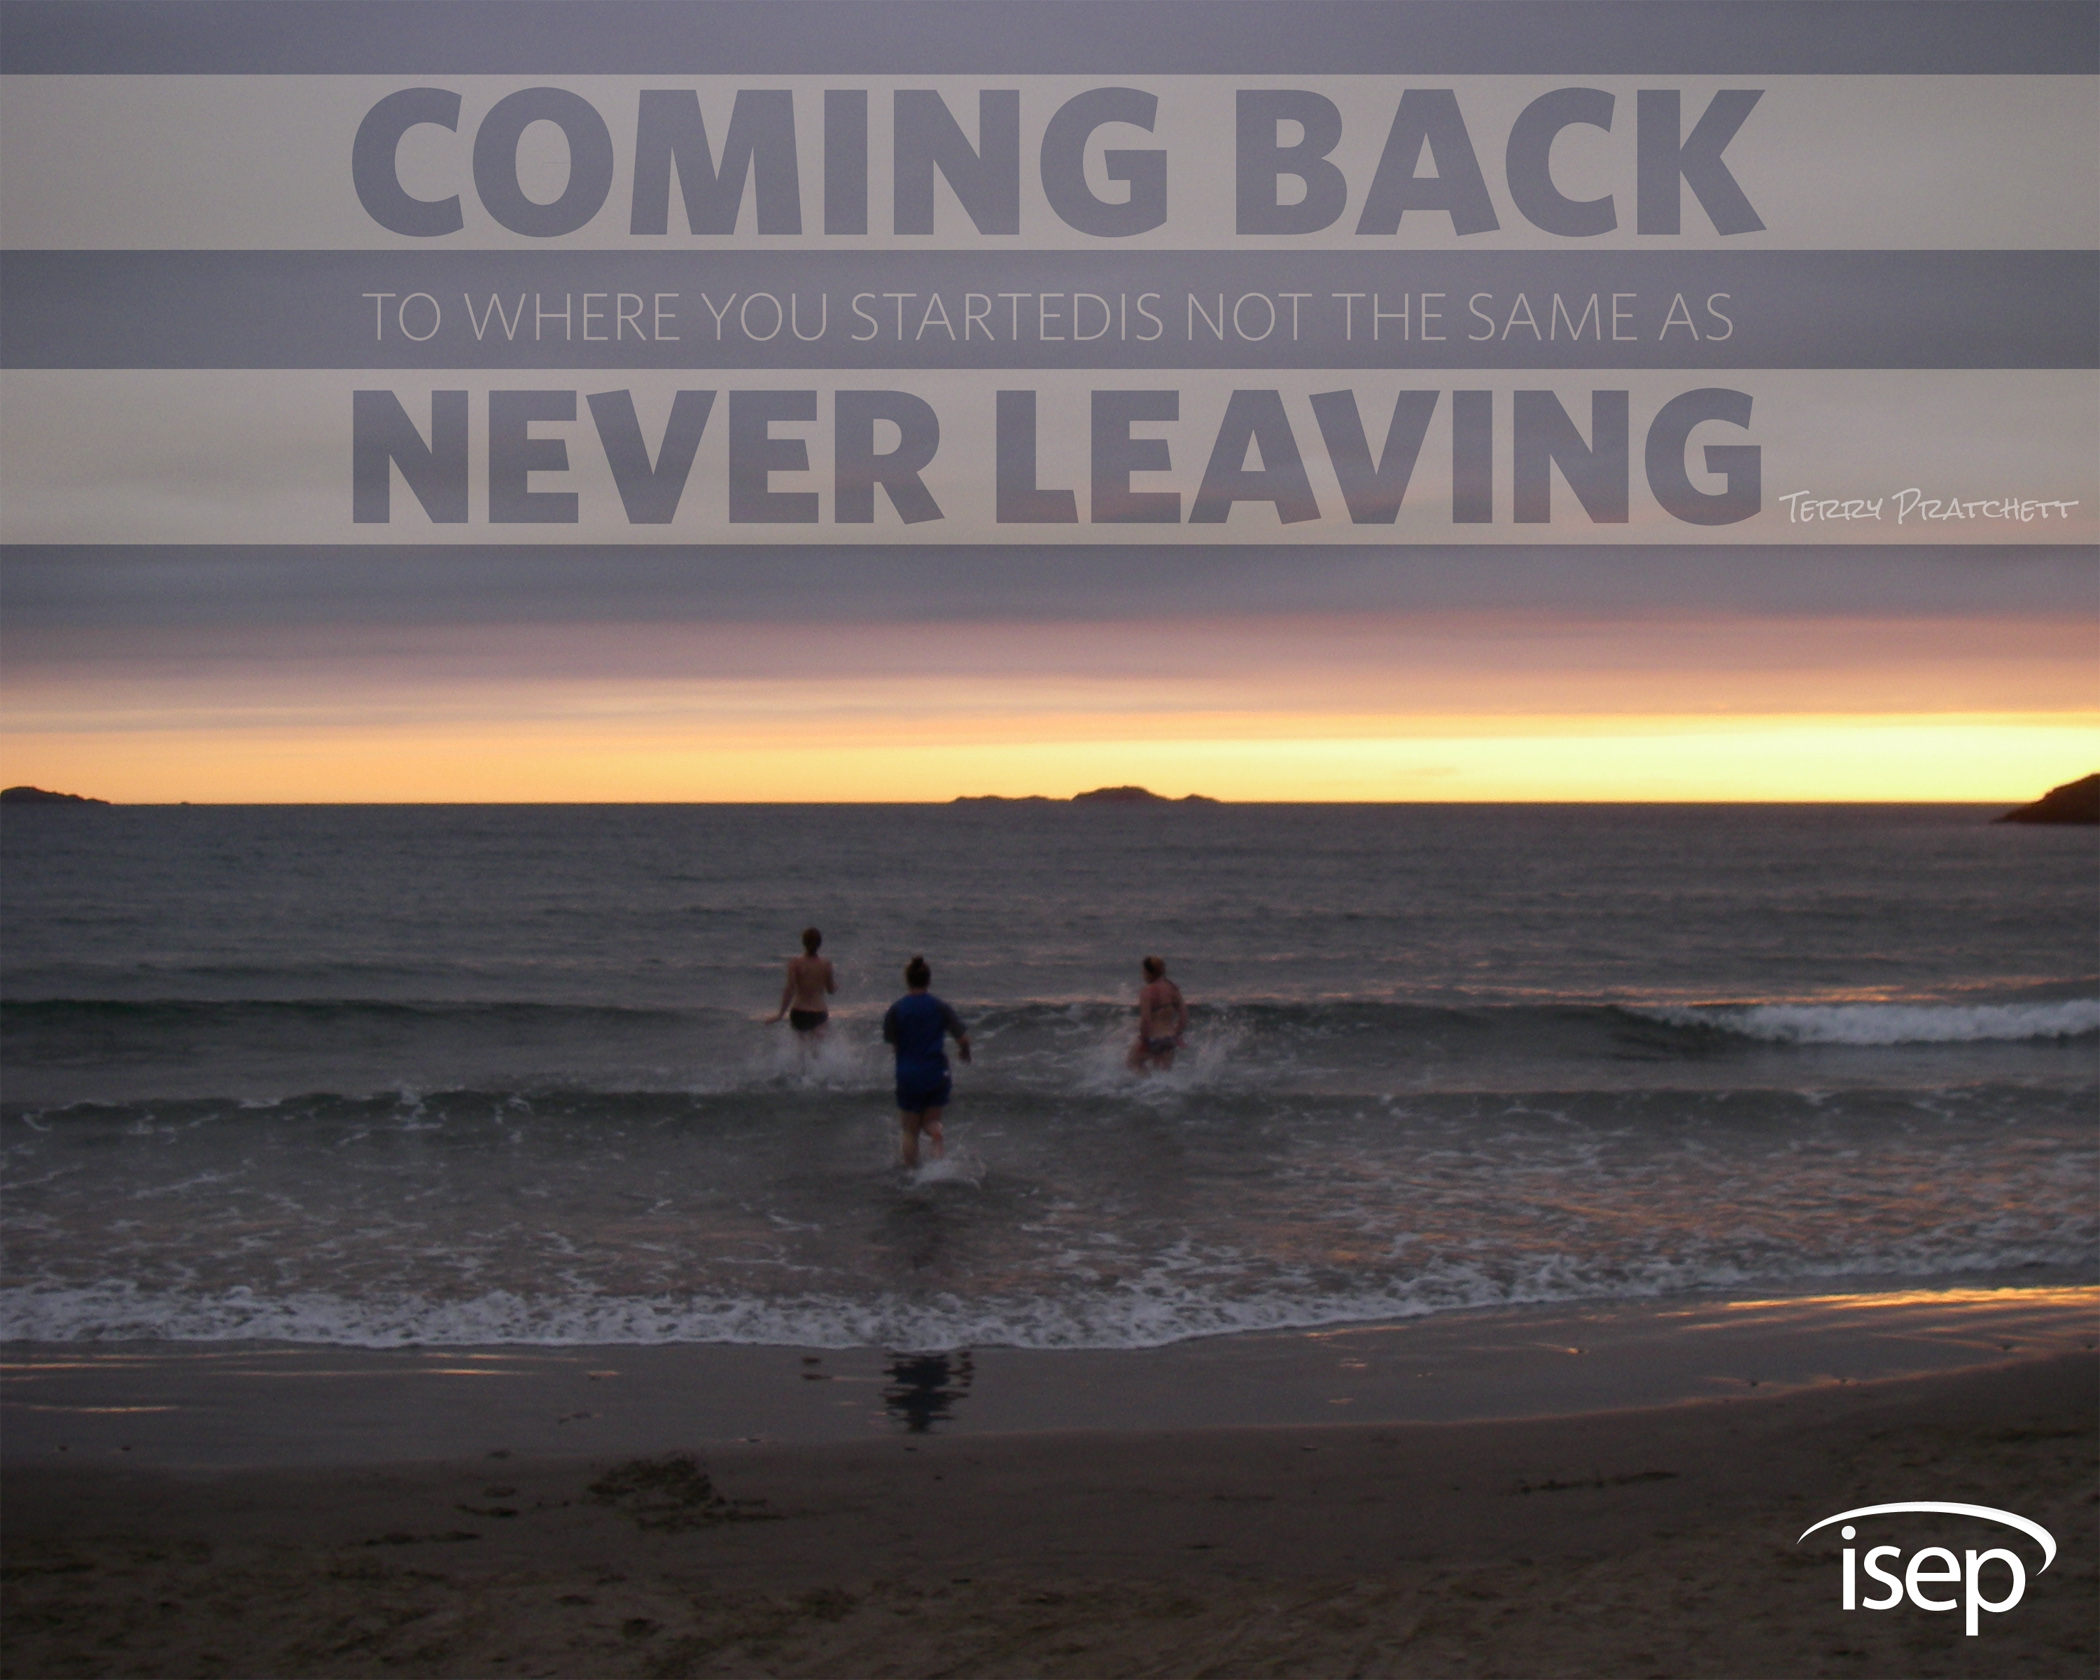 Come back to work. Coming back. Never the same. Working abroad quotes. Arrive leave.